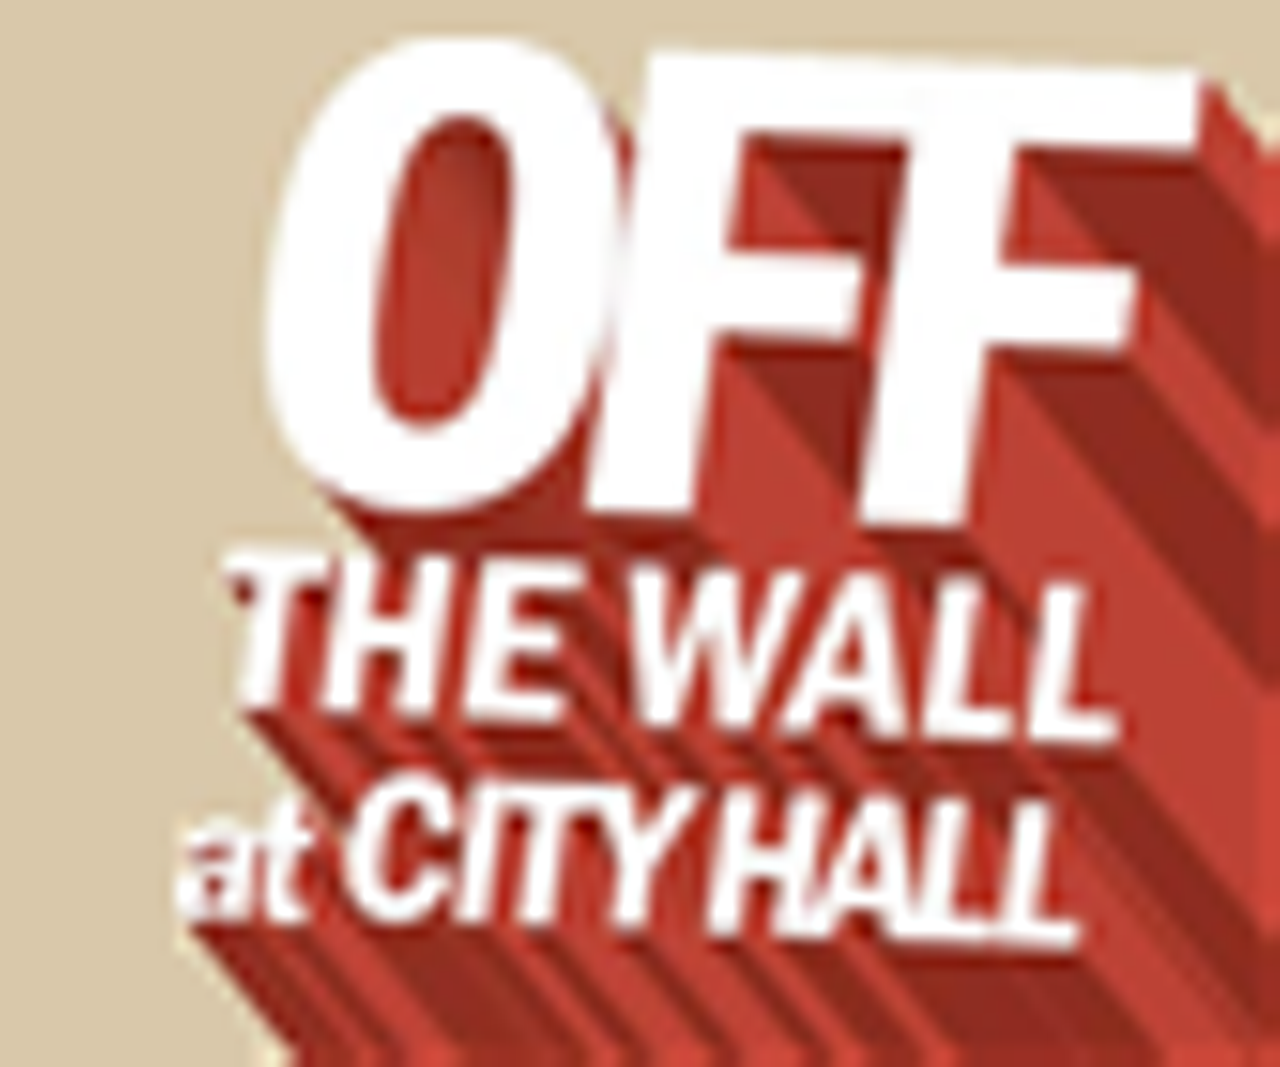 Off the Wall at City Hall